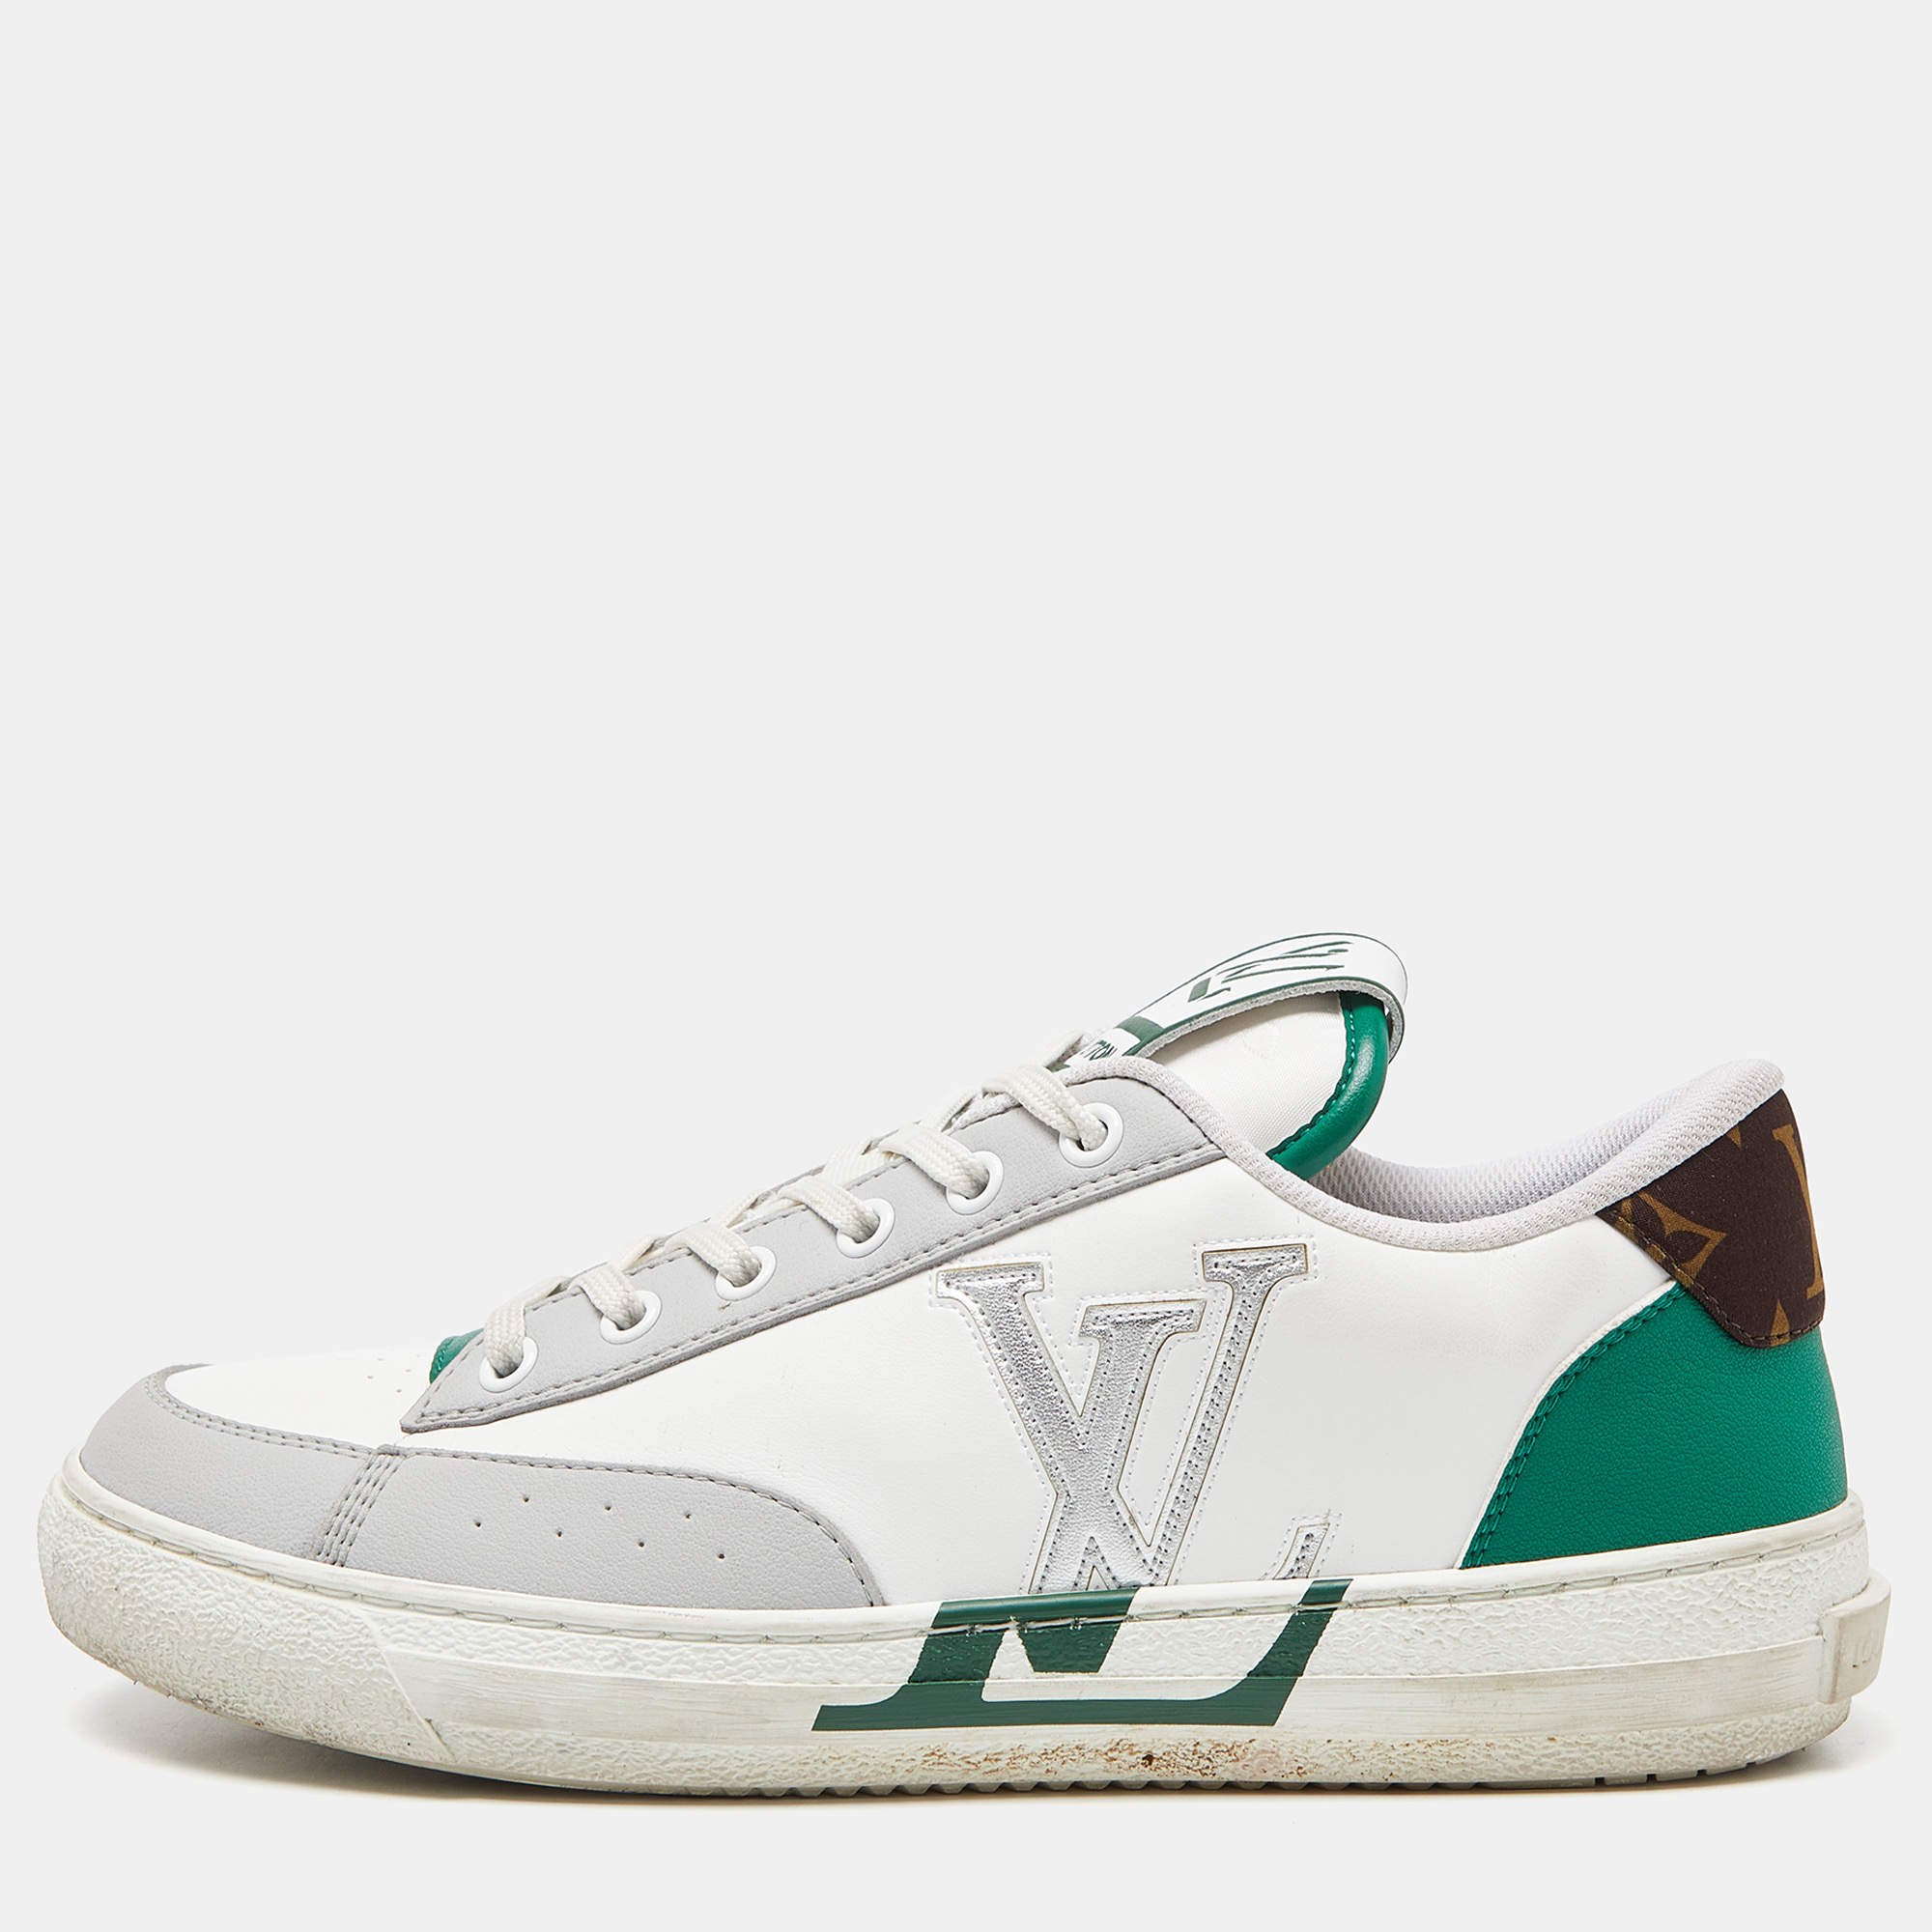 Louis Vuitton White/Green Leather Charlie Sneakers Size 39